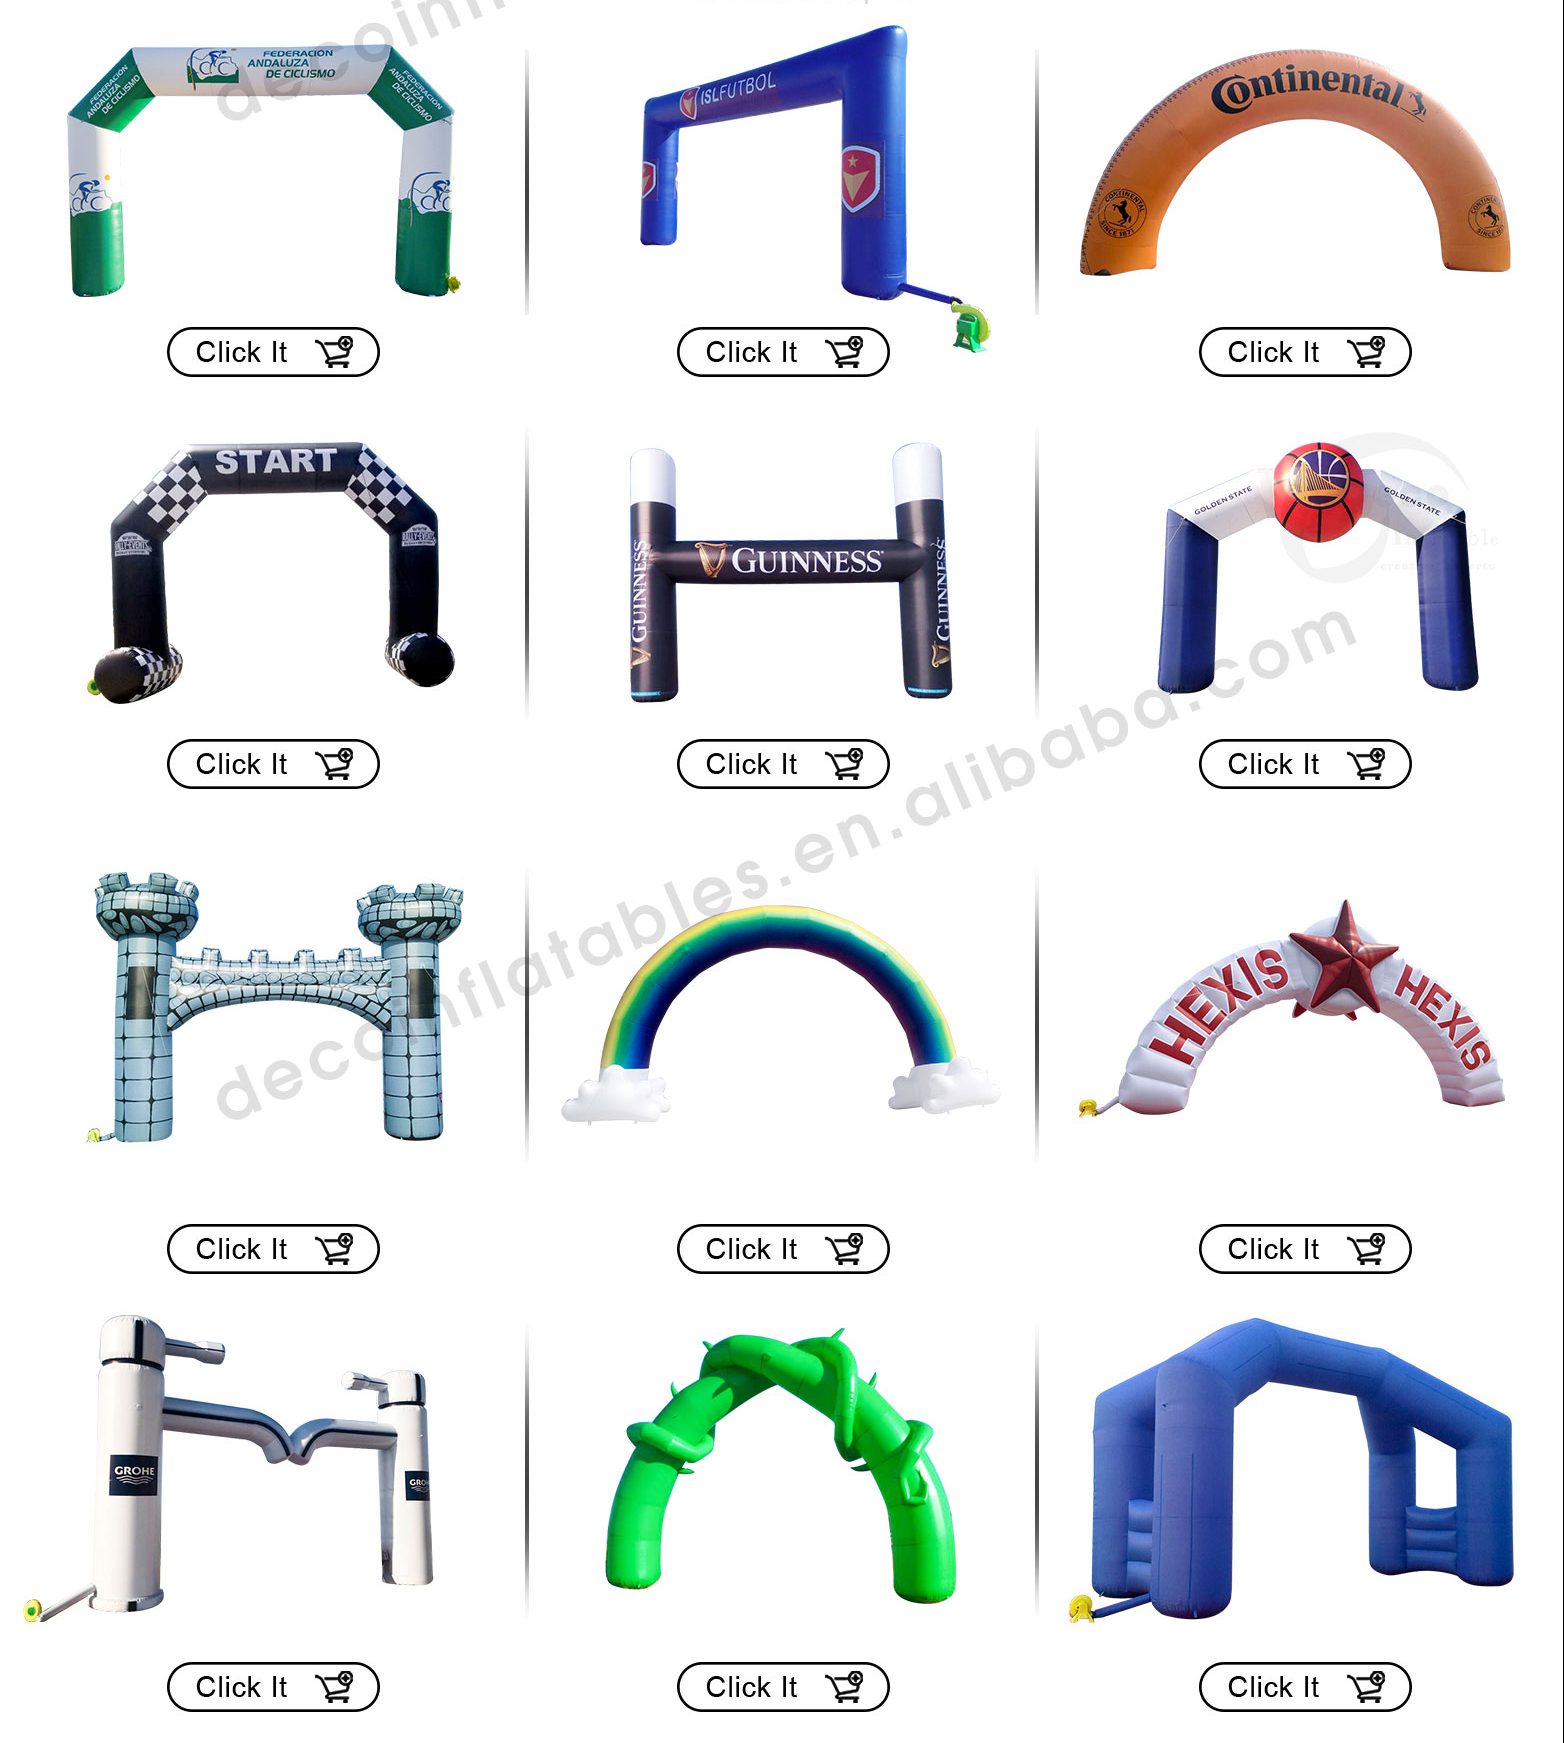 custom giant blow up start beginning finish arch gate running sport spnsorship inflatable arch插图2